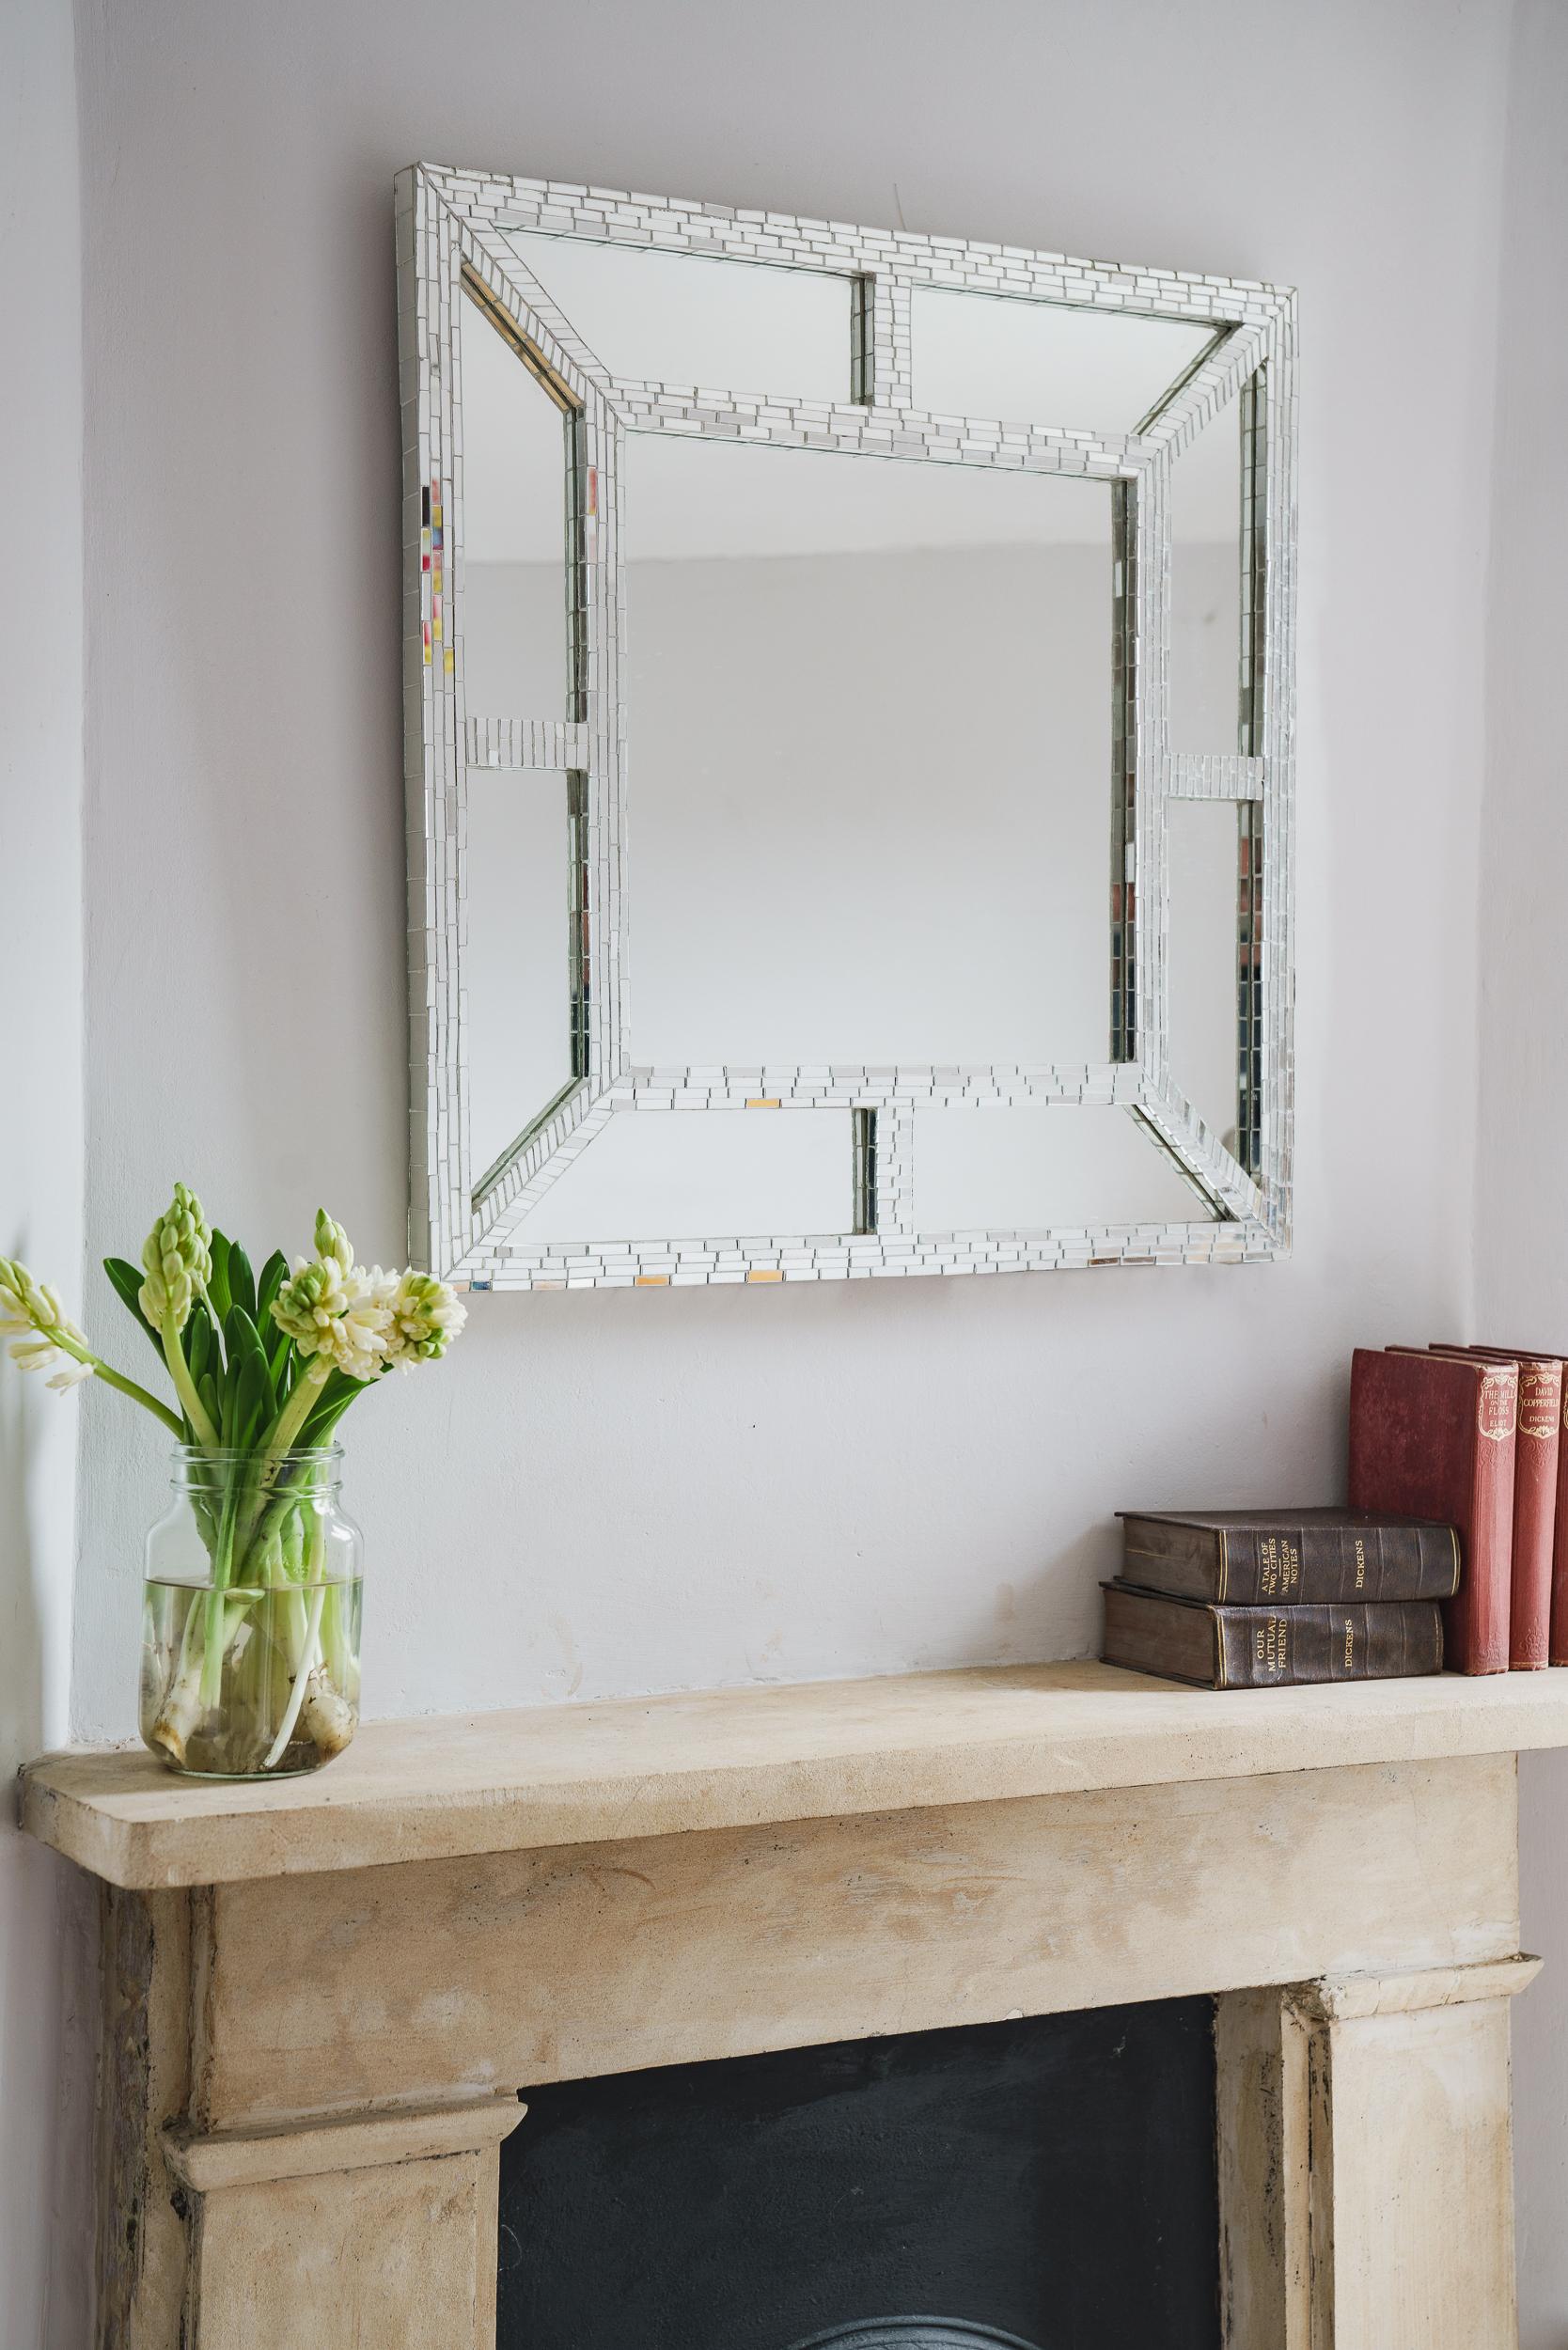 Square Ventana Mosaic mirror hand made in UK by Claire Nayman. This contemporary classic margin mirror in mirrored glass finish. Each tiny mosaic tesserae is hand cut with an exemplary eye for detail. It can also be made in copper leaf hand gilded